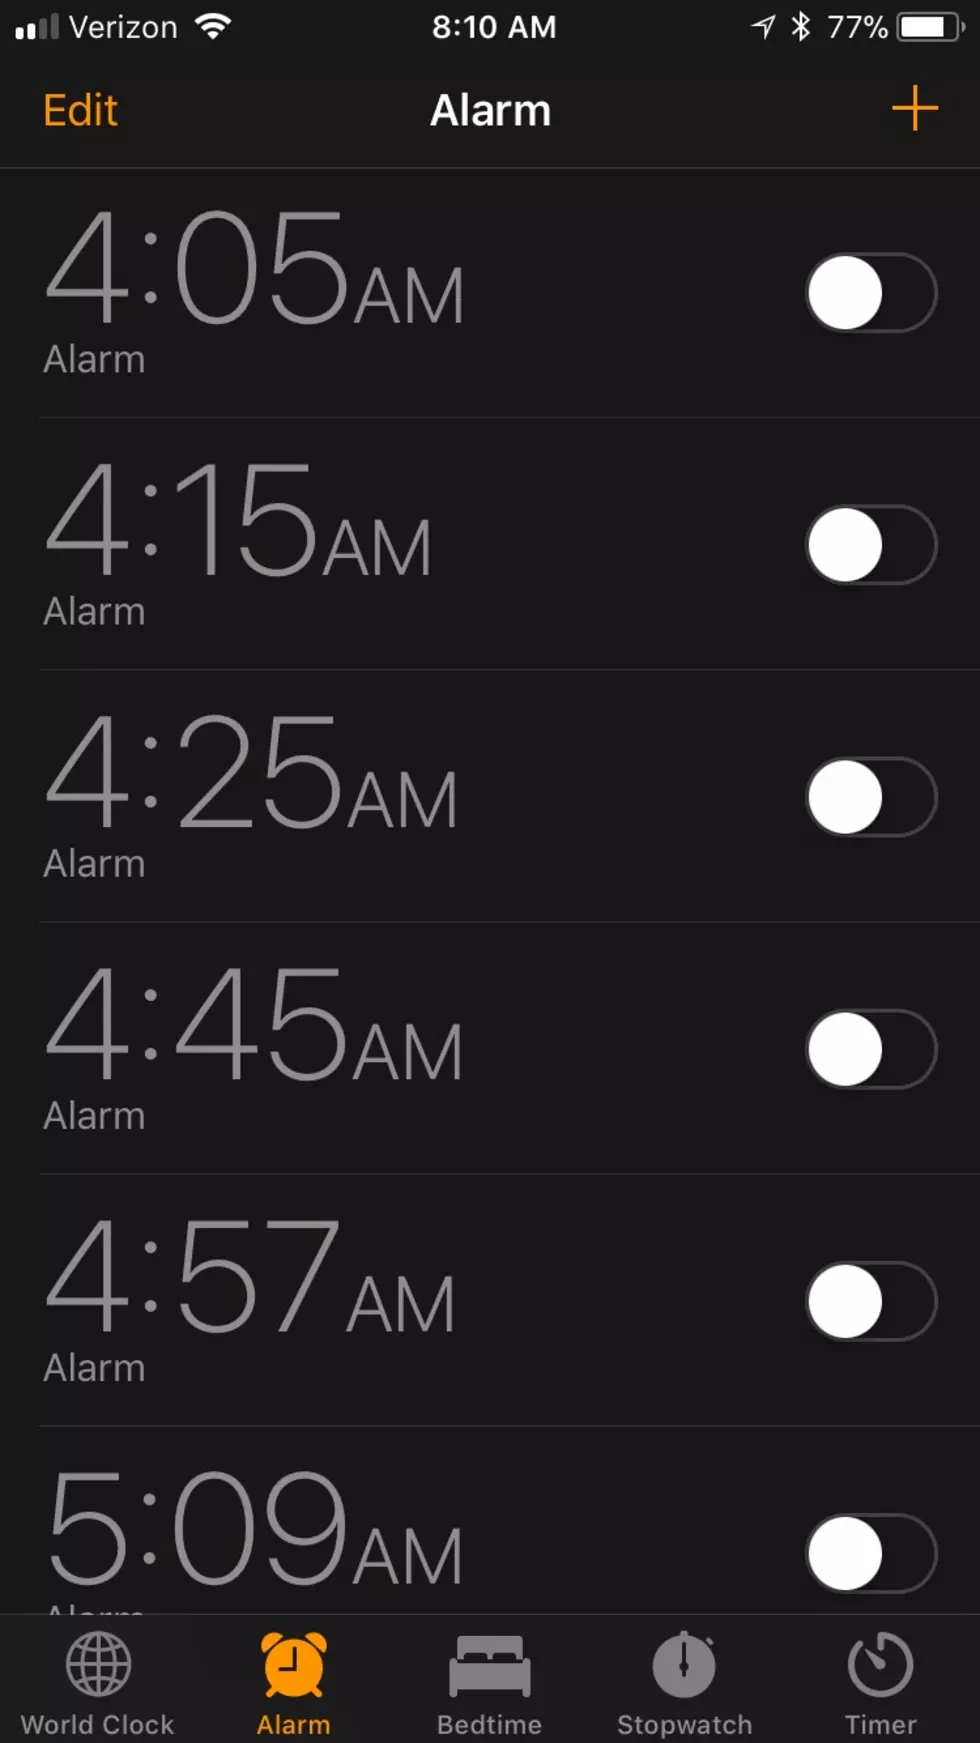 How Many Alarms Do You Have on Your Phone?